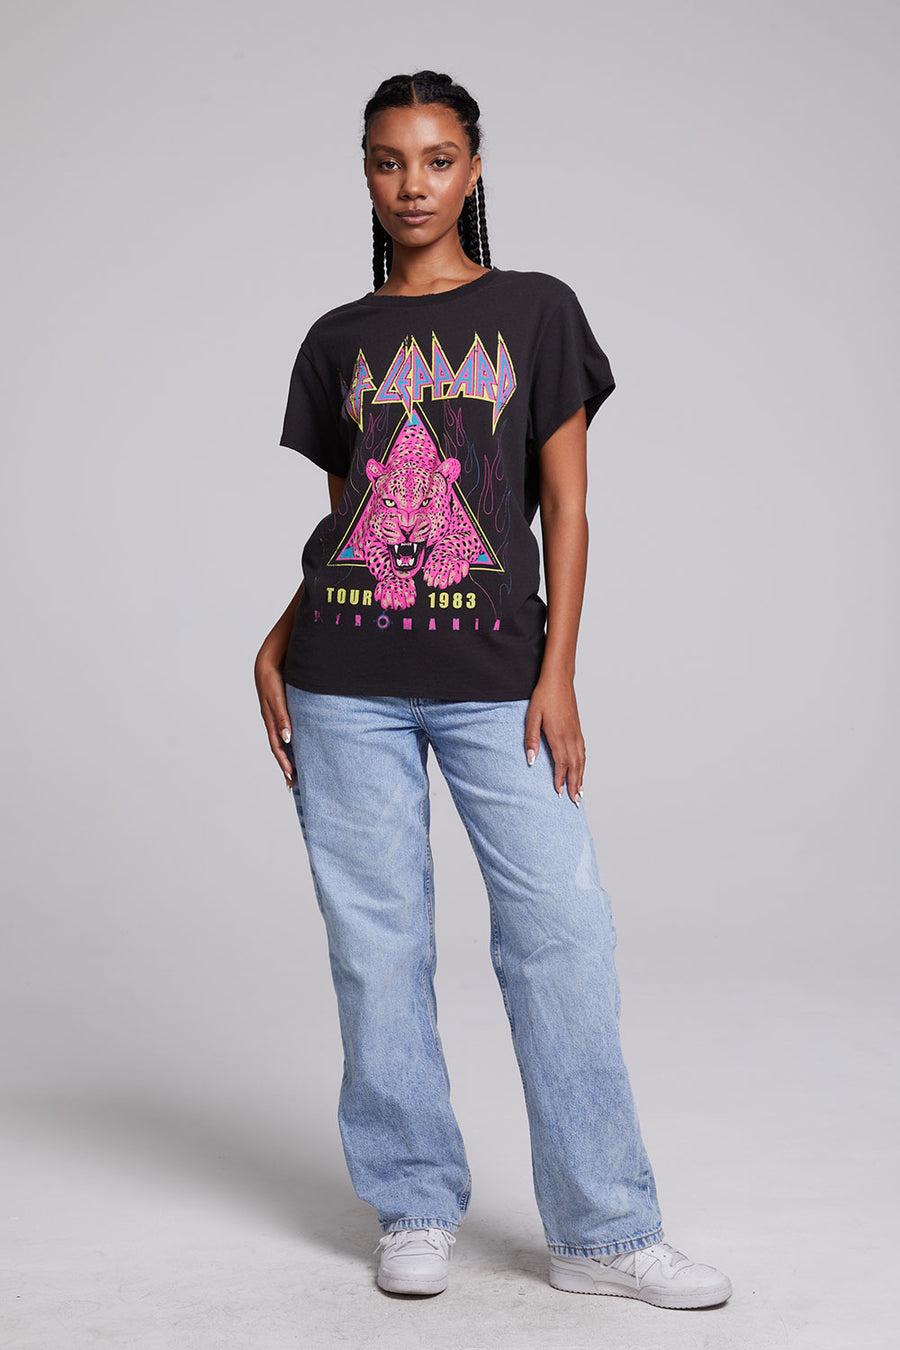 Def Leppard Pyromania Tee WOMENS chaserbrand